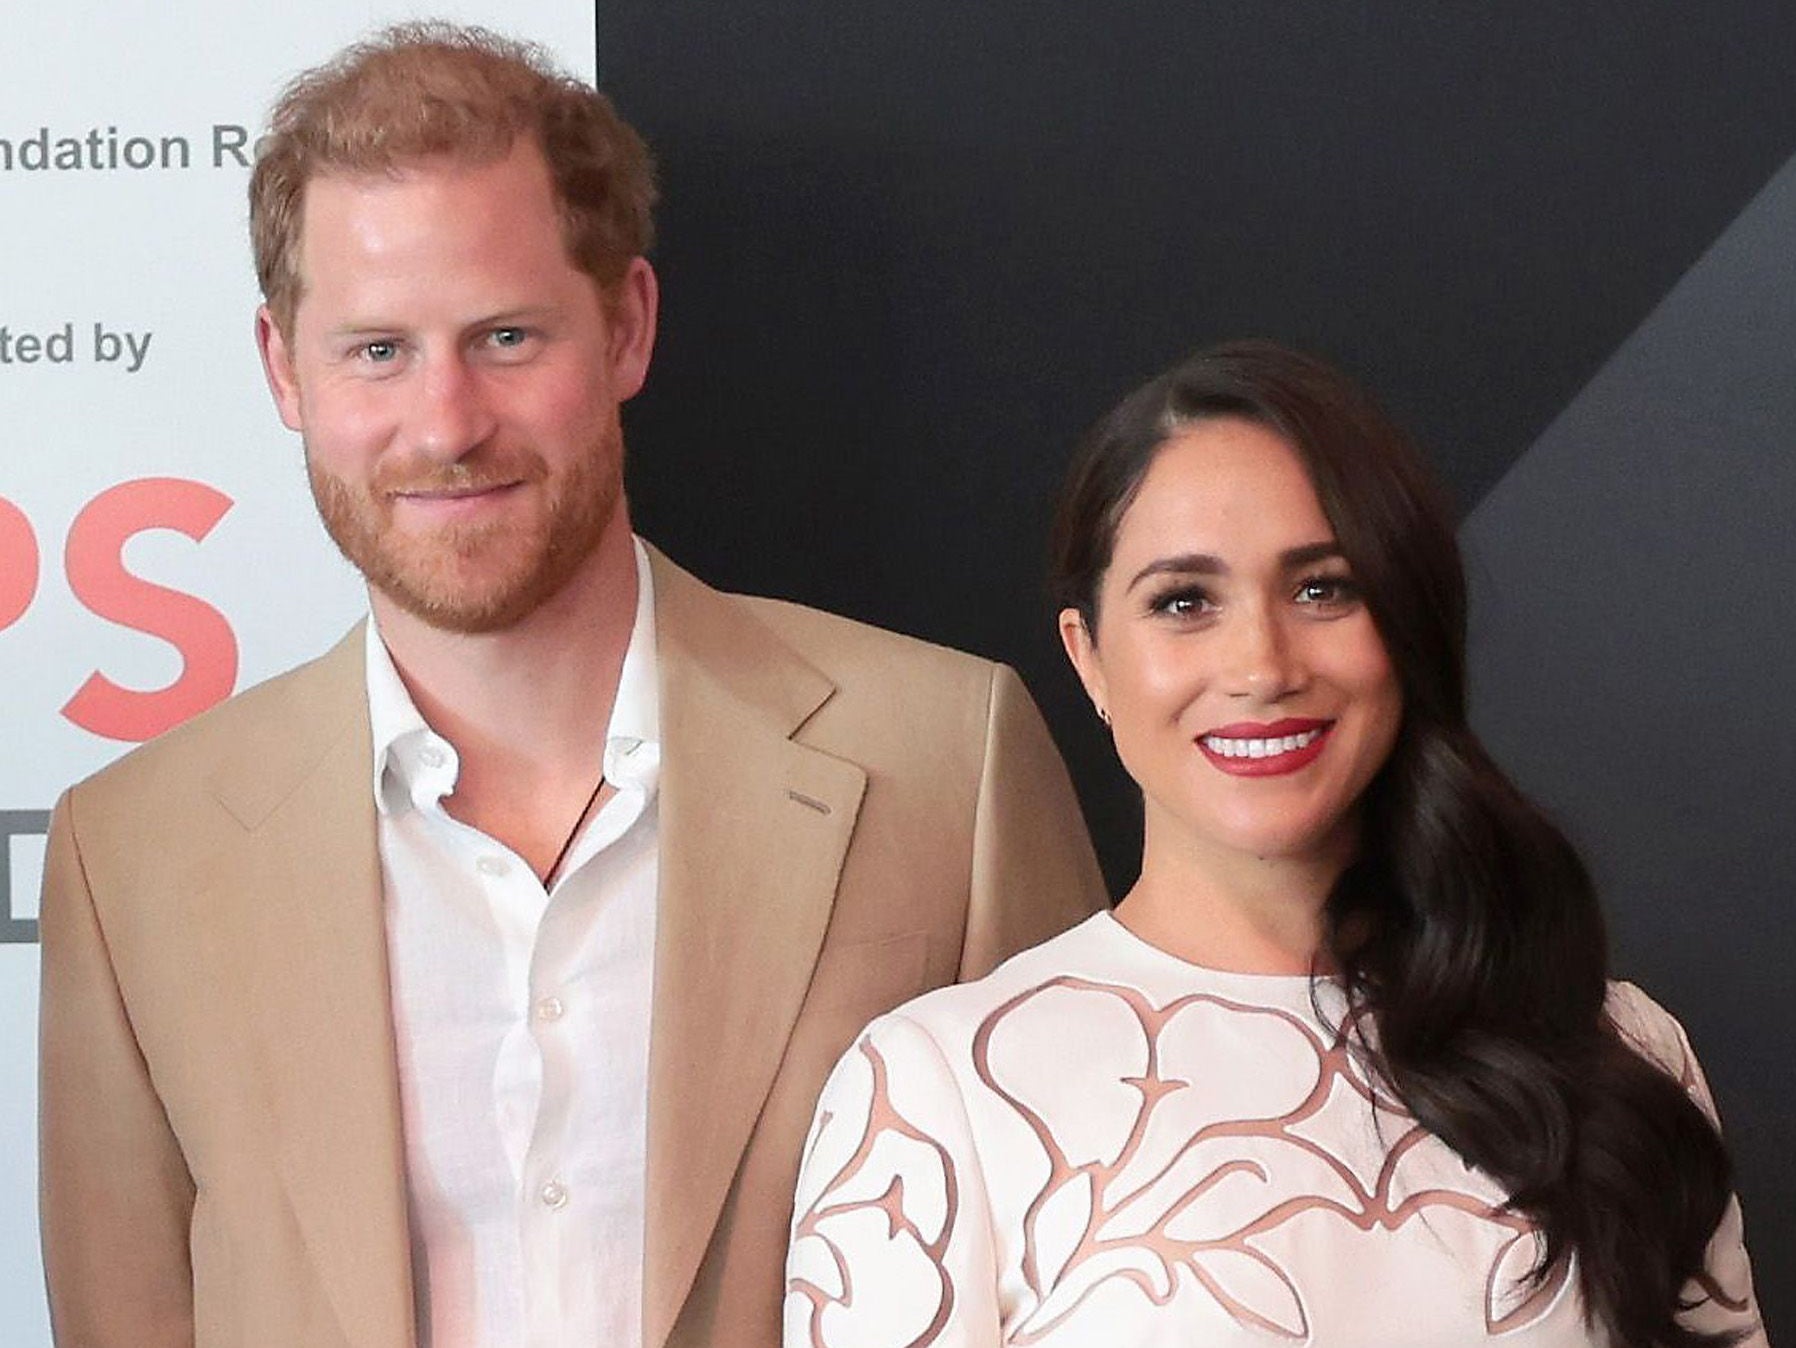 Prince Harry opens up about returning to Invictus Games with Meghan Markle